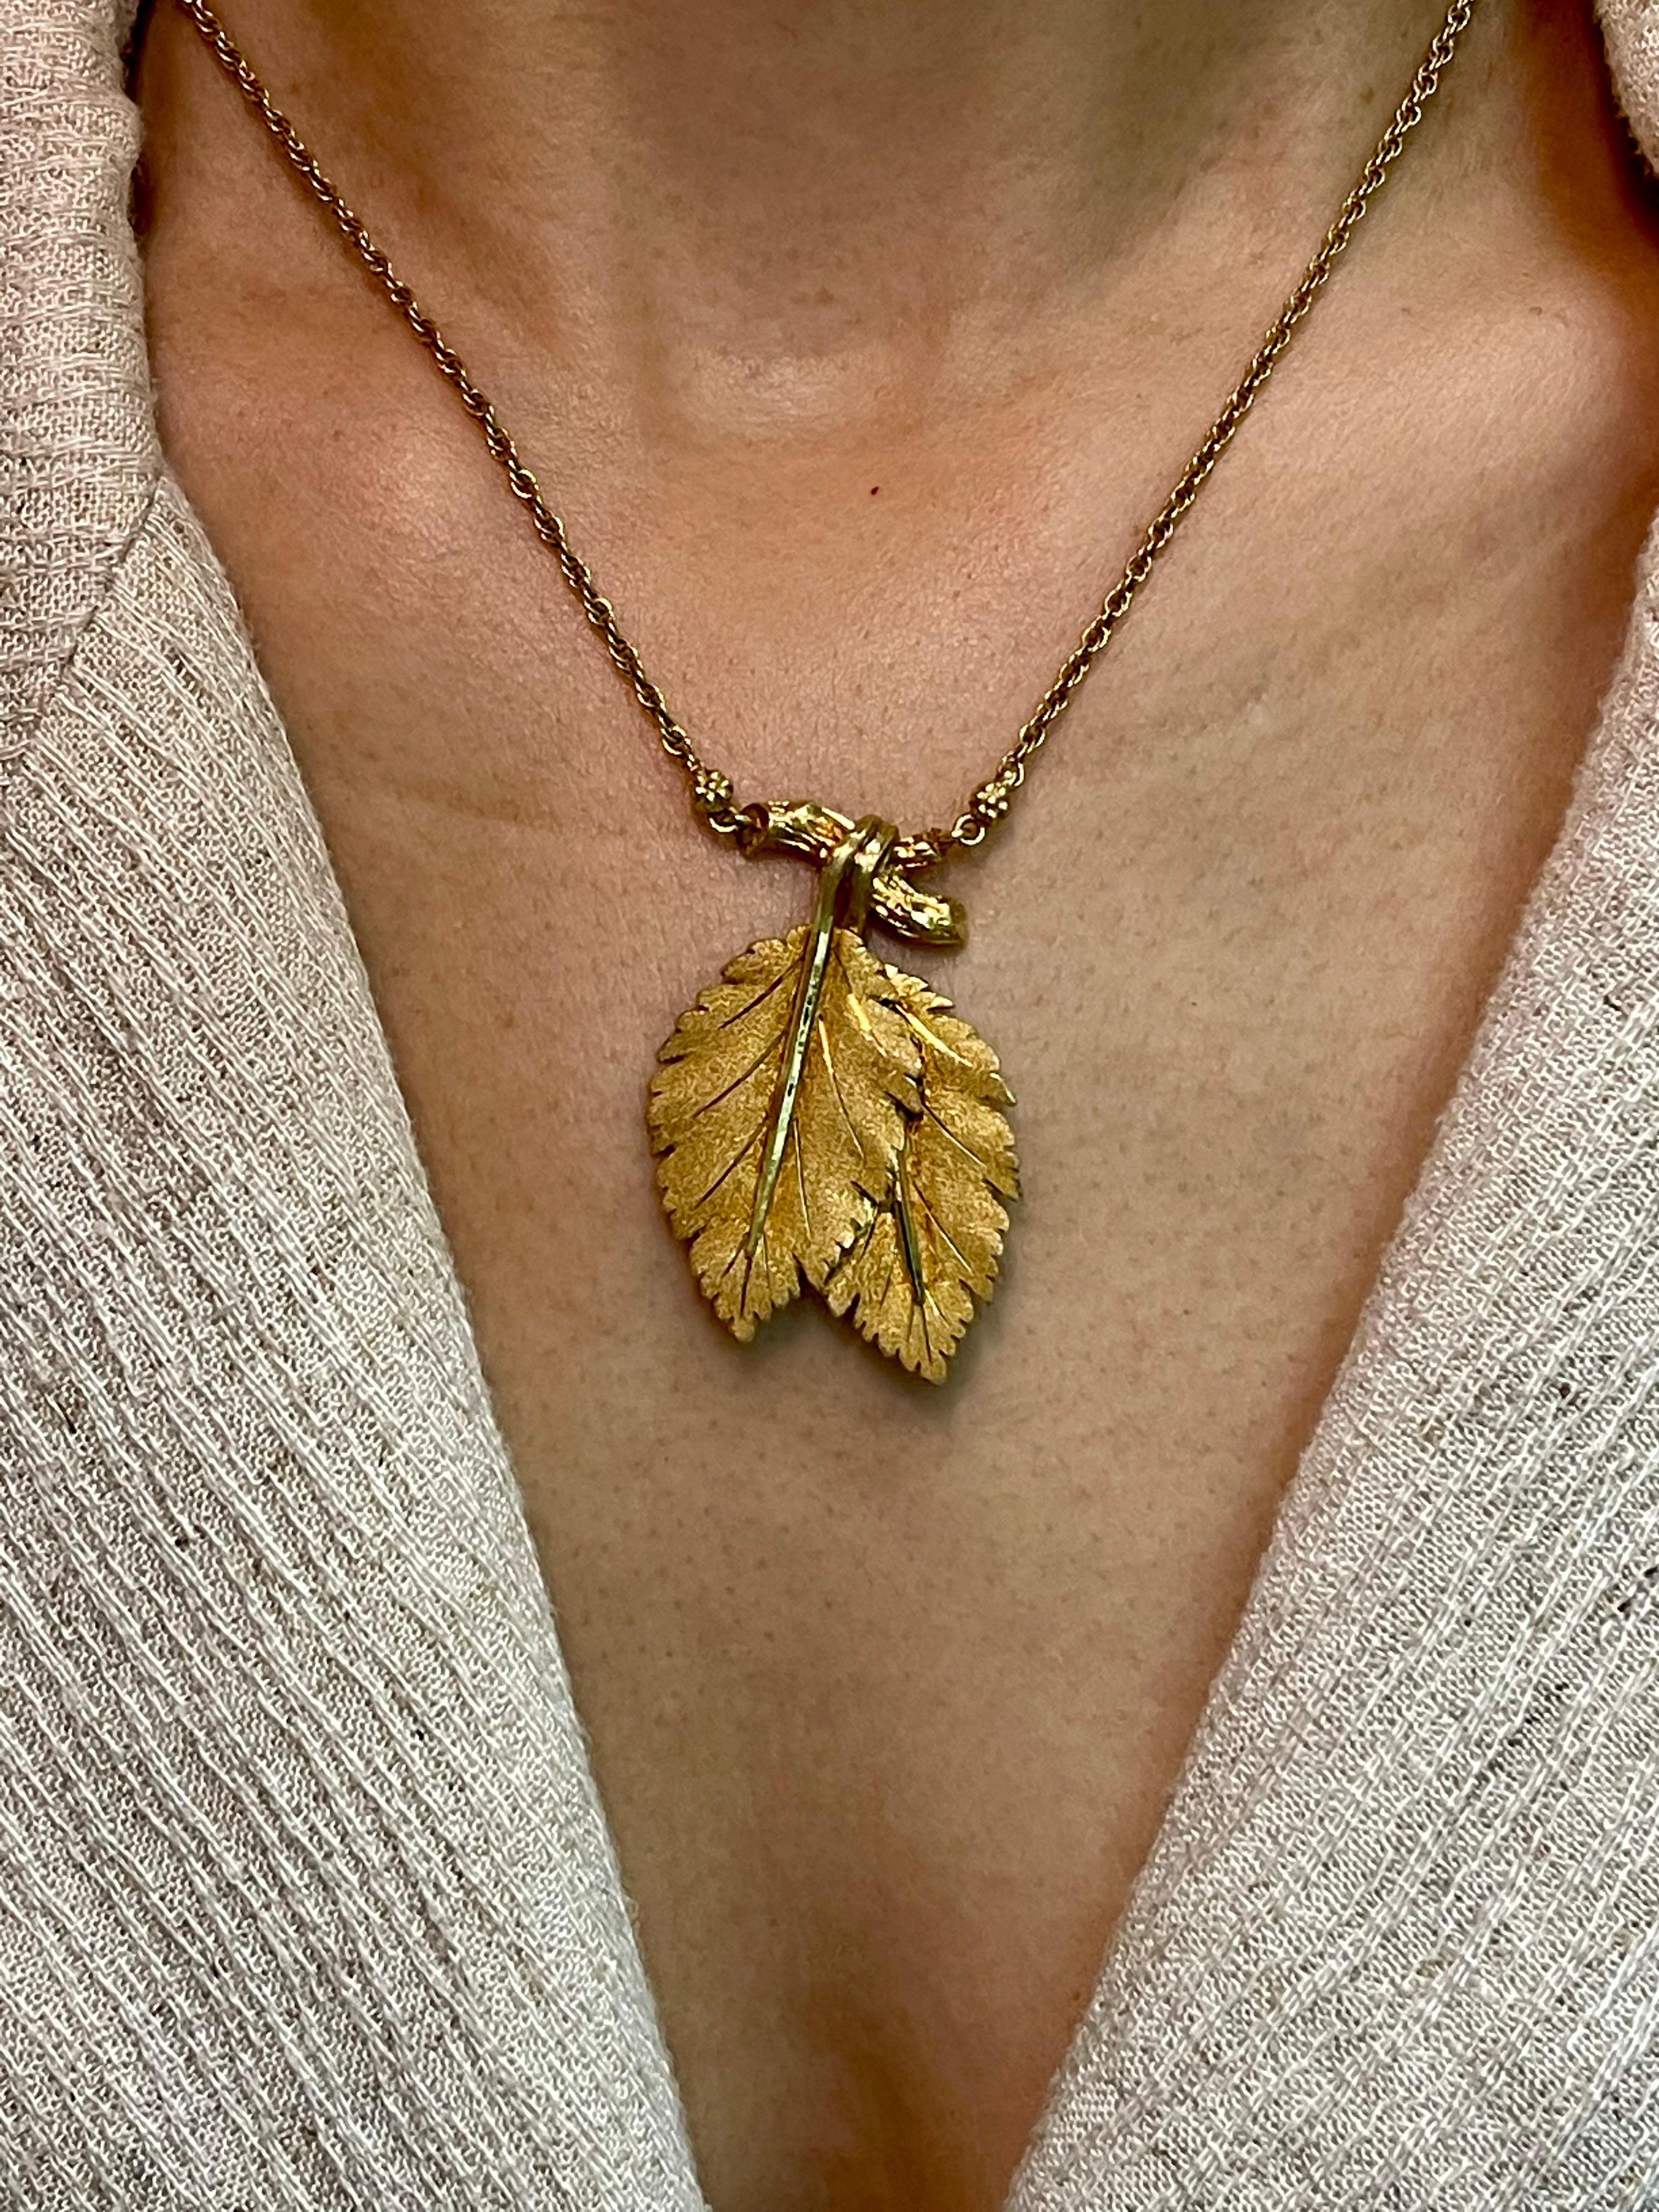 Buccellati, Federico 18K Yellow Gold Leaves and Twigs Pendant Drop Necklace  7